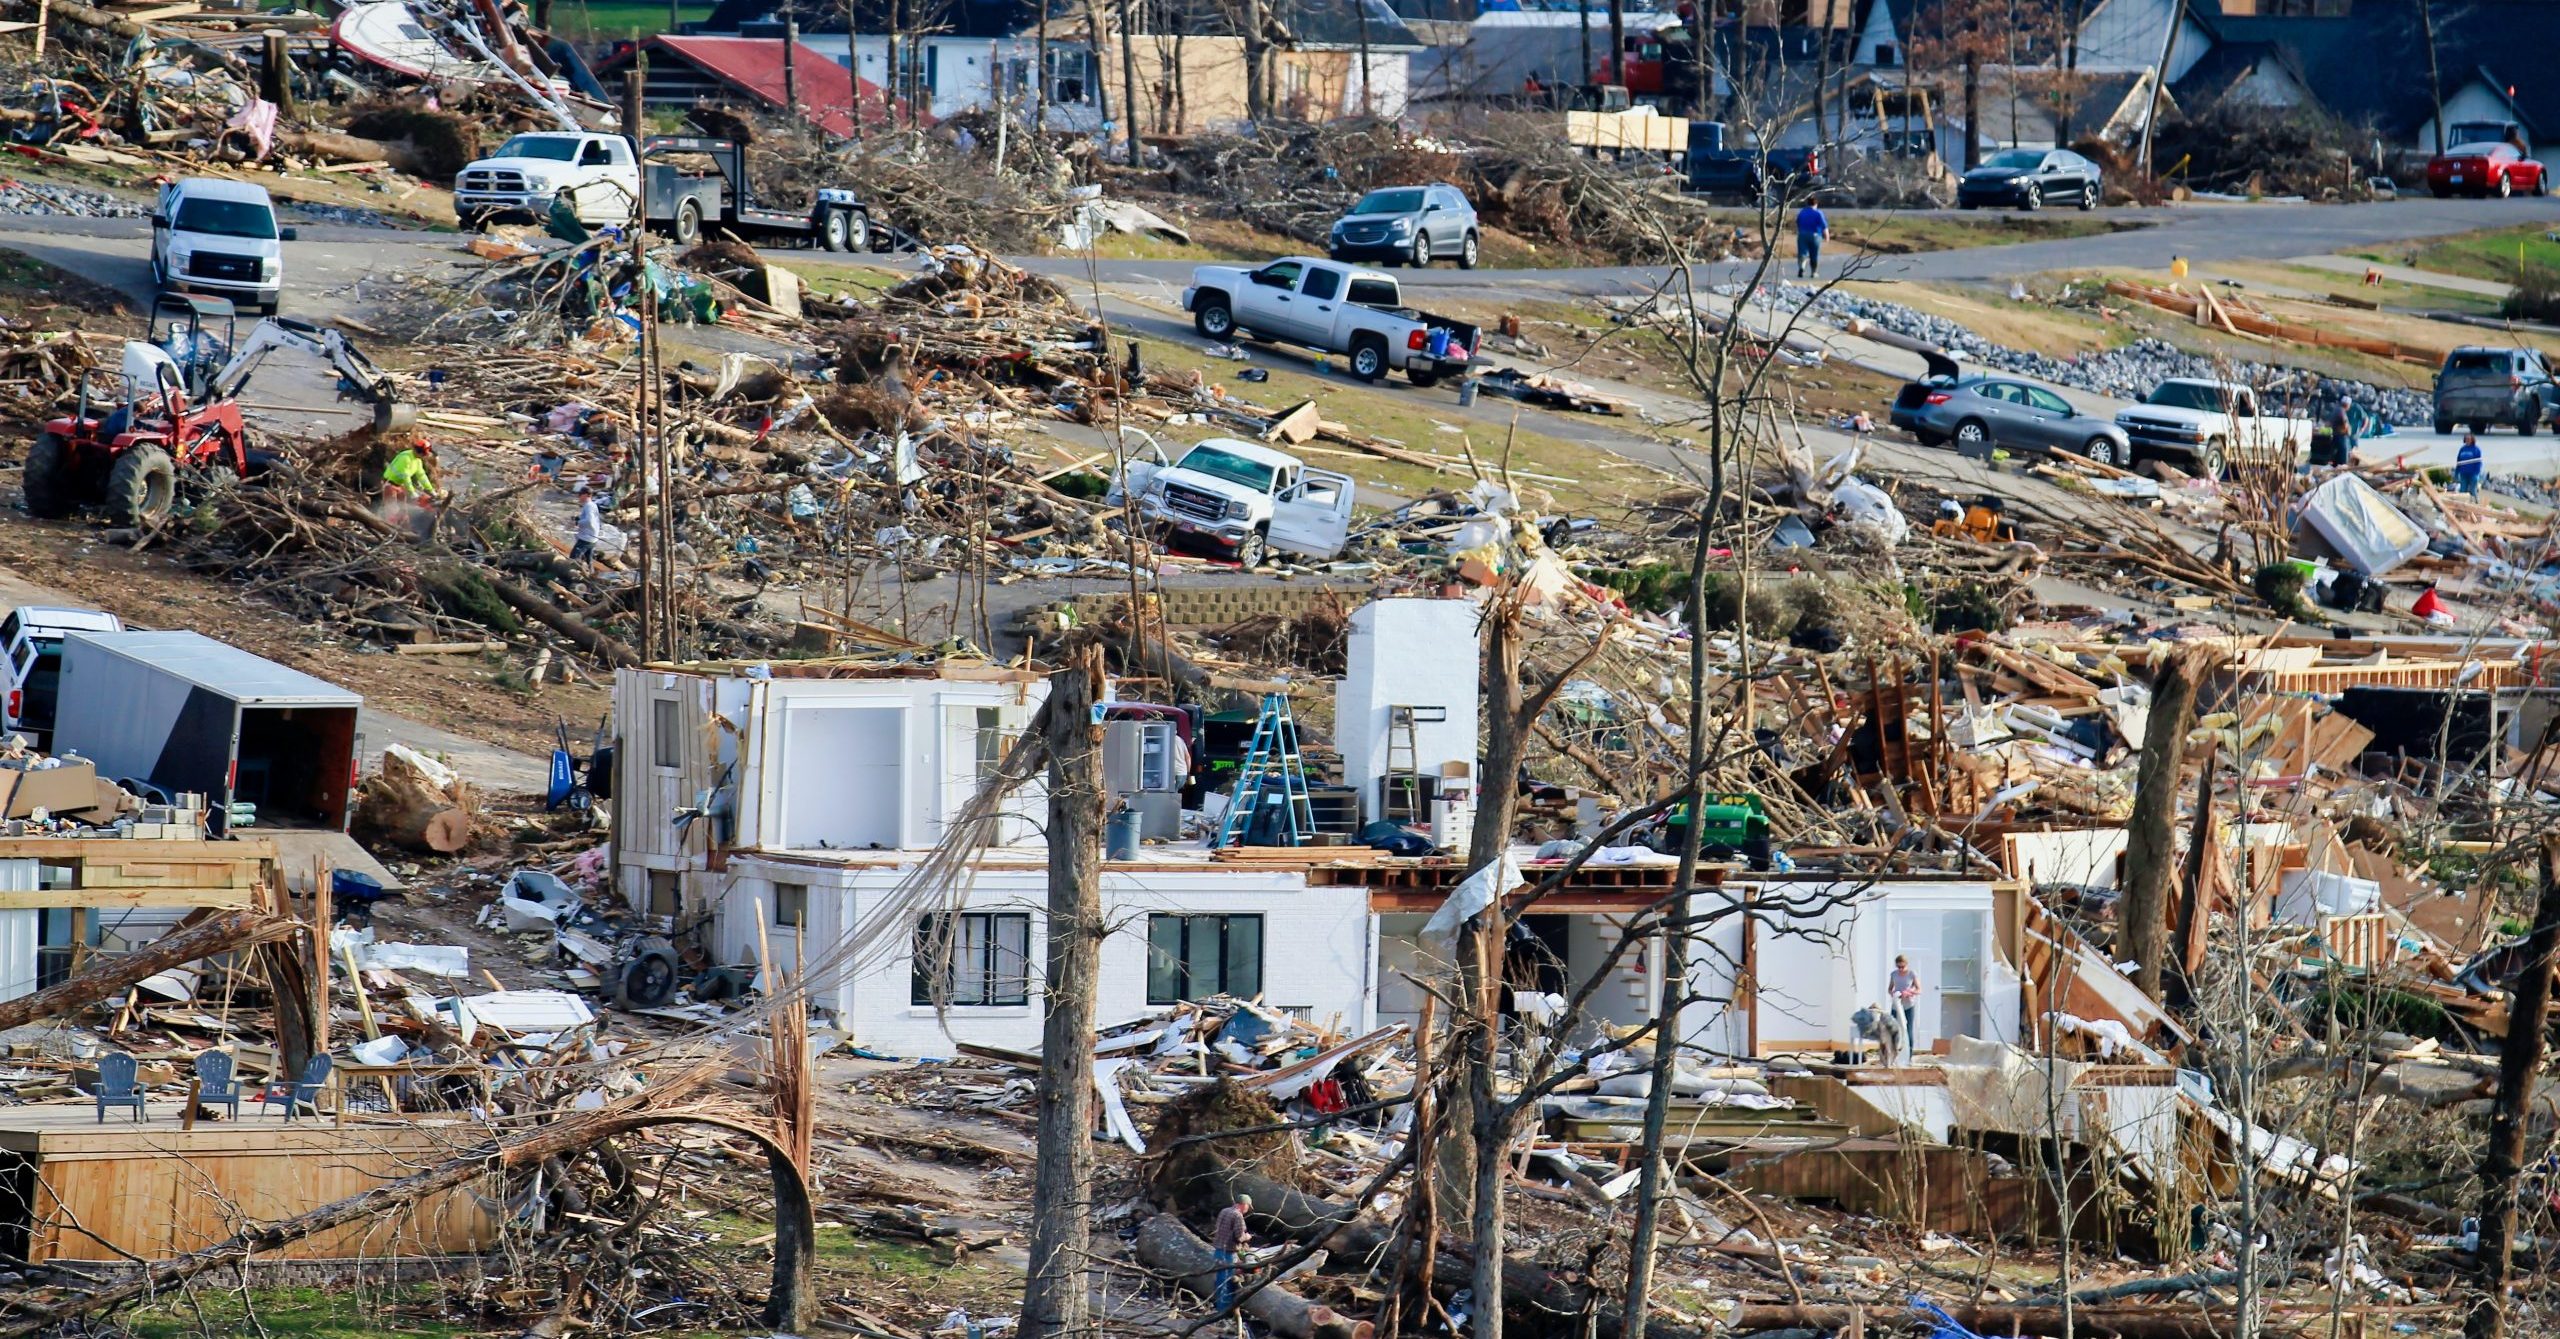 DriveSavers Offers $500 Relief for Data Recovery to Oklahoma Tornado Victims